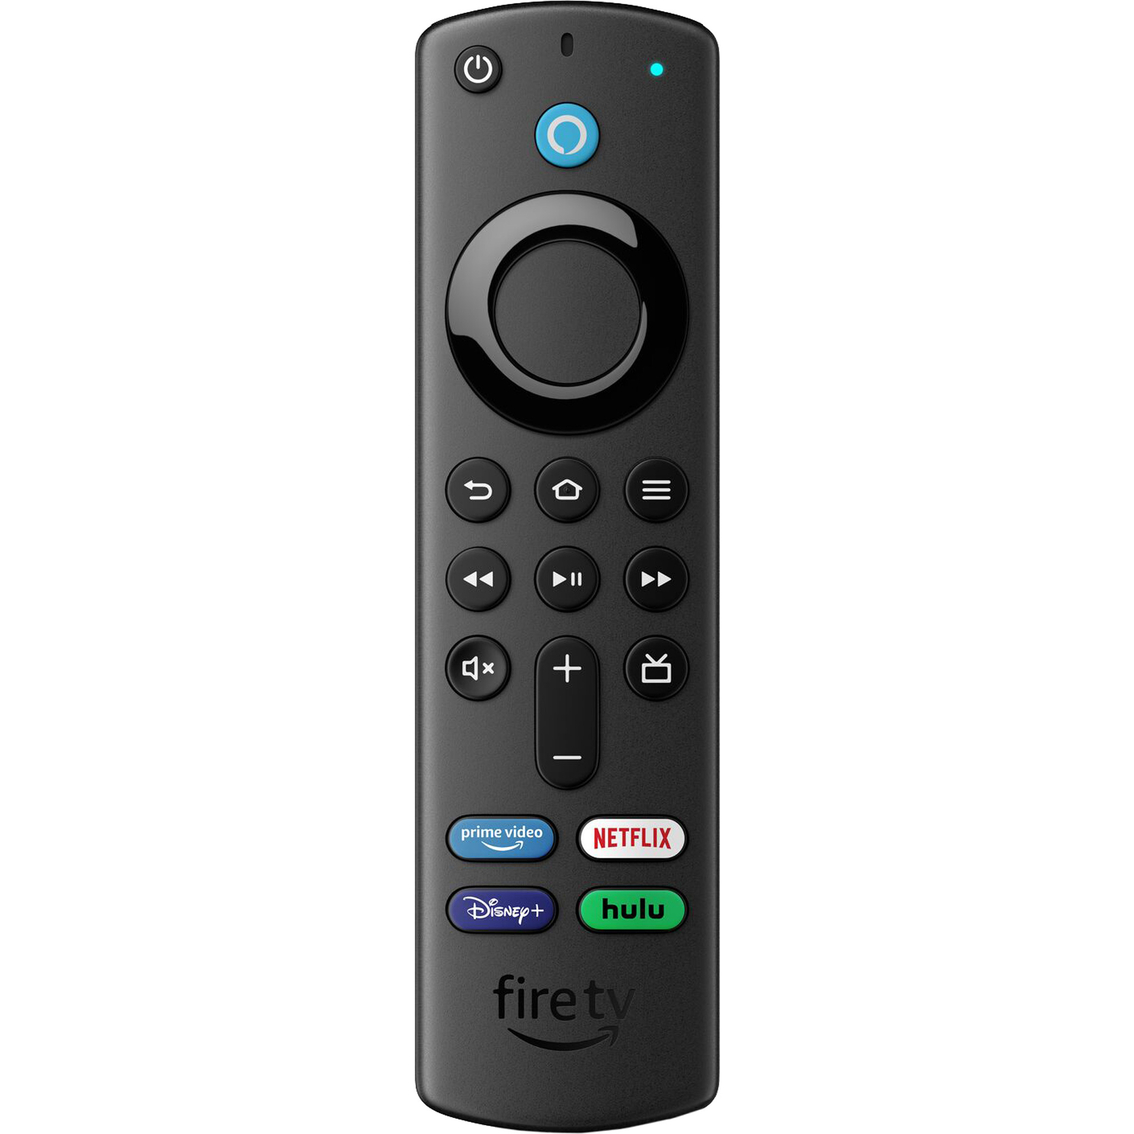 upgrades its Fire TV Stick with the new Alexa Voice Remote